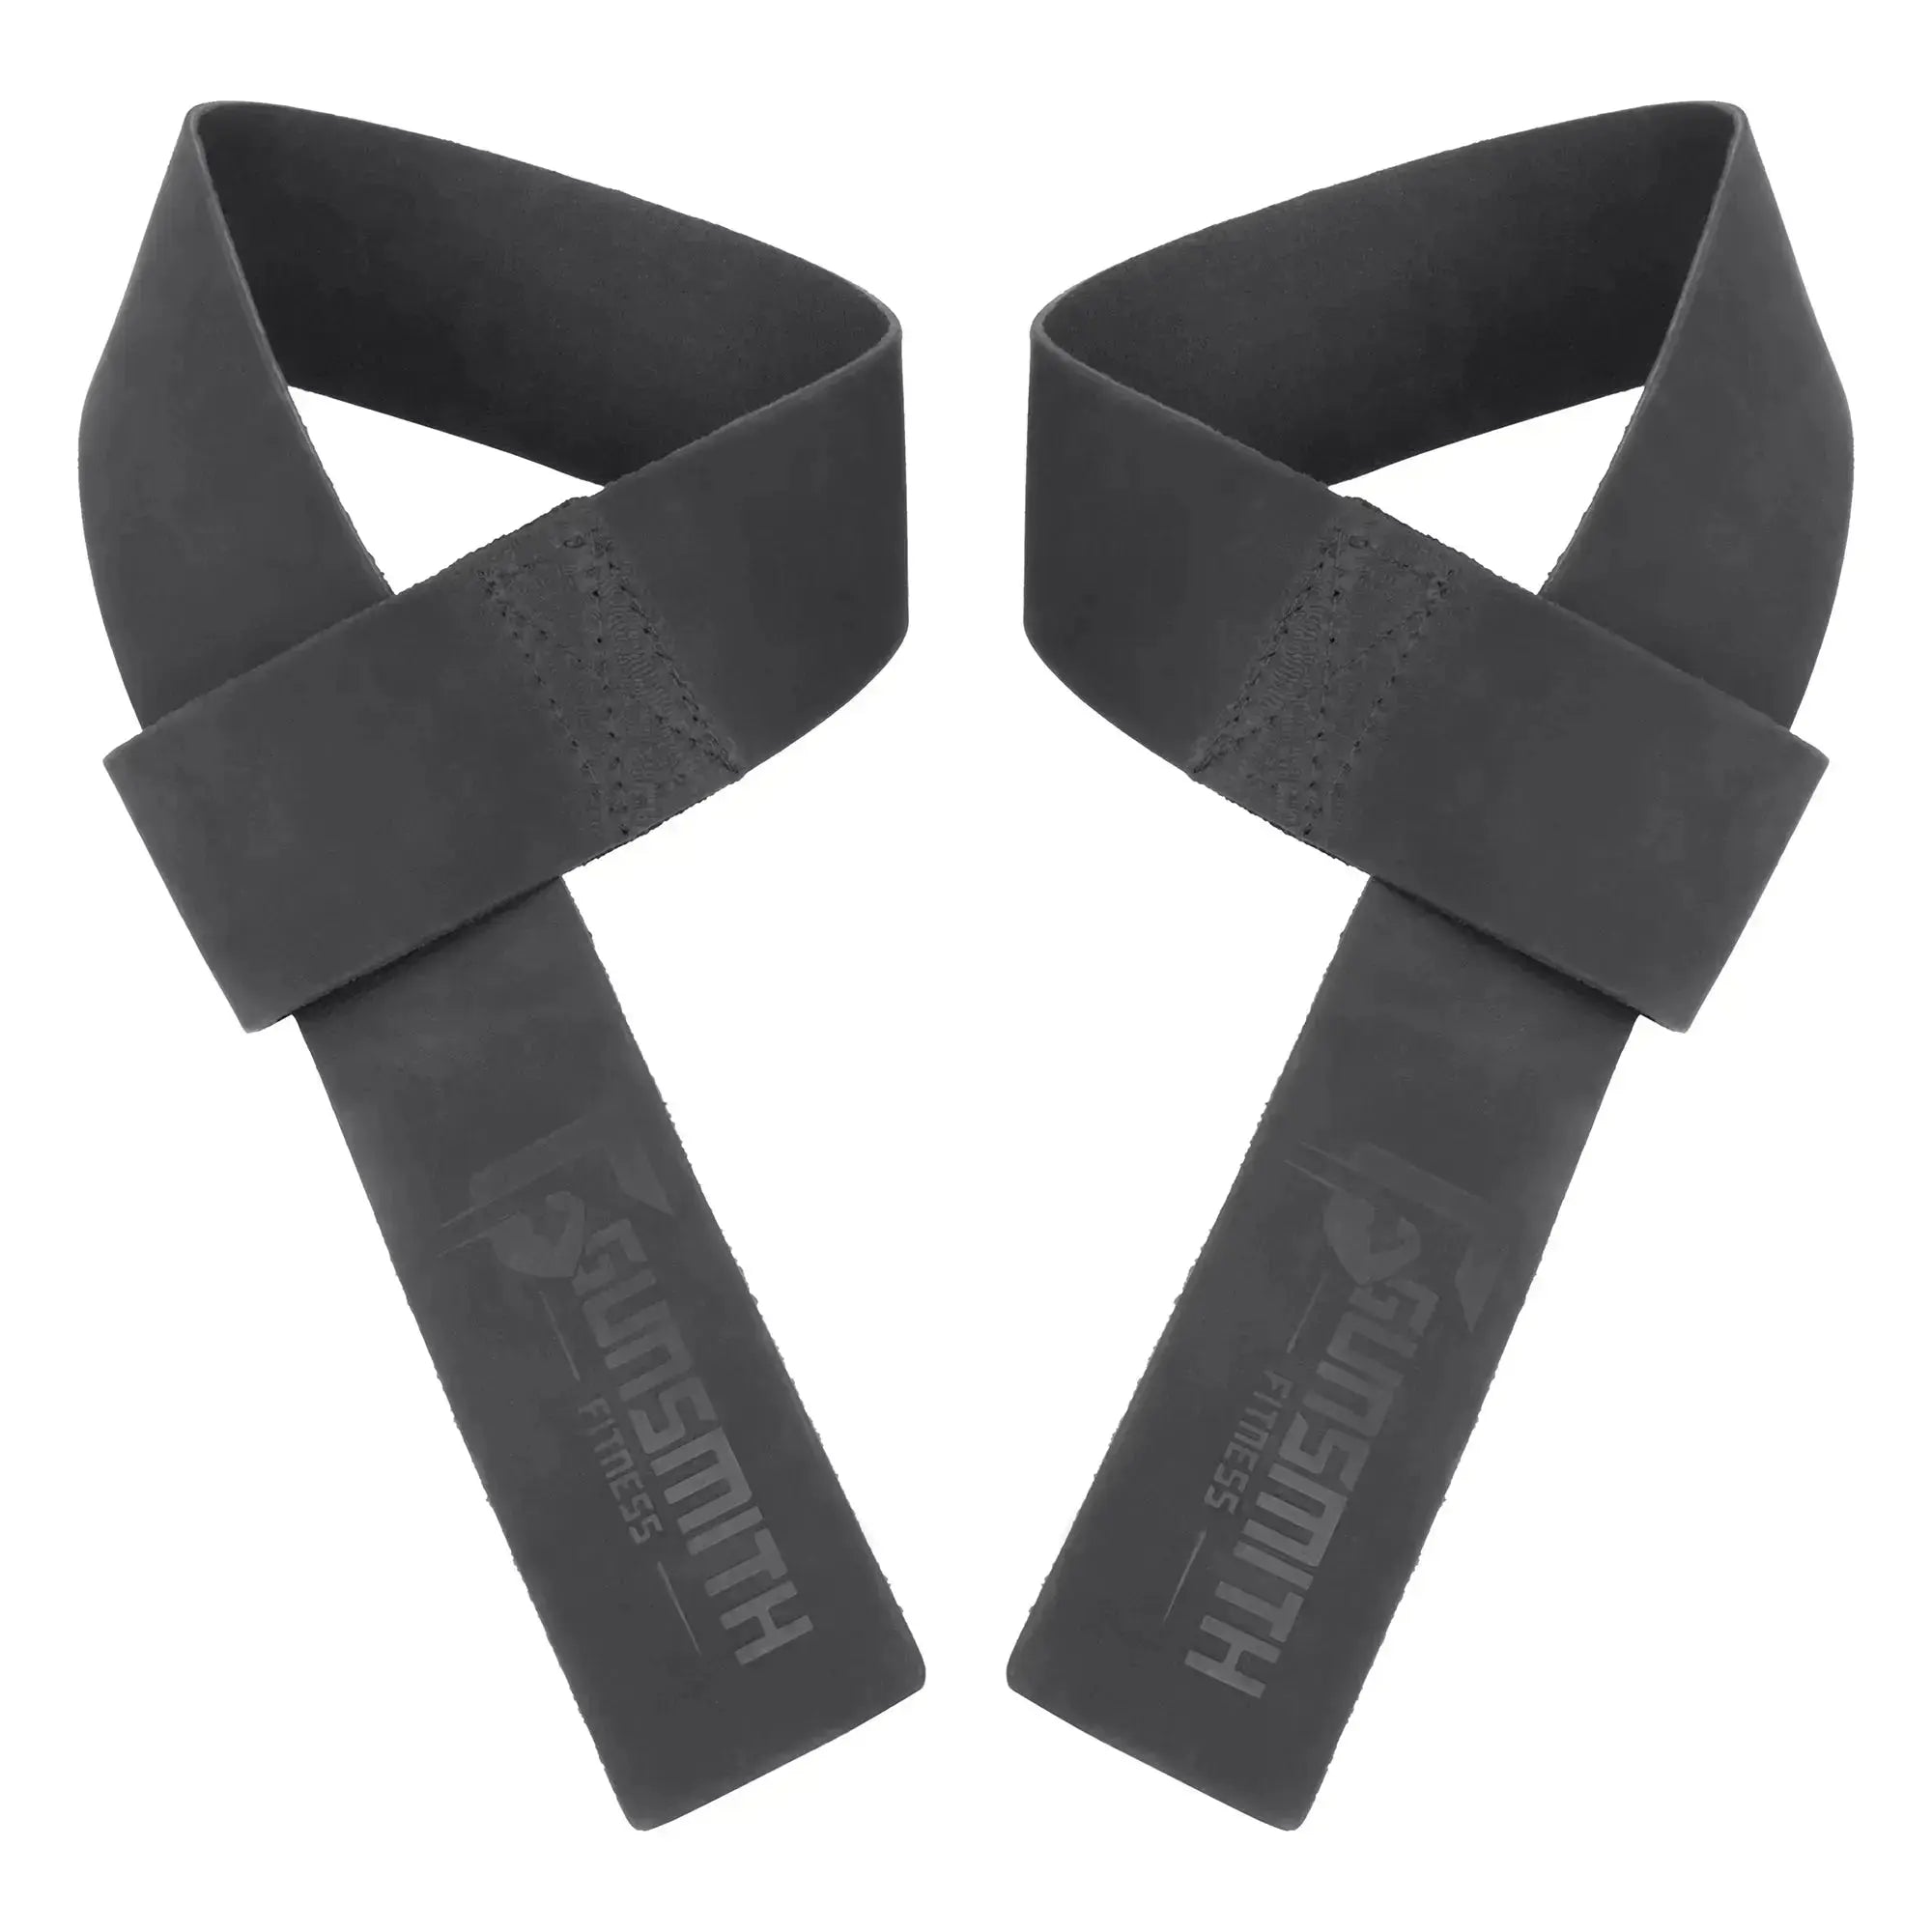 Premium 2 inch/5cm Wide Genuine Leather Weight Lifting Straps